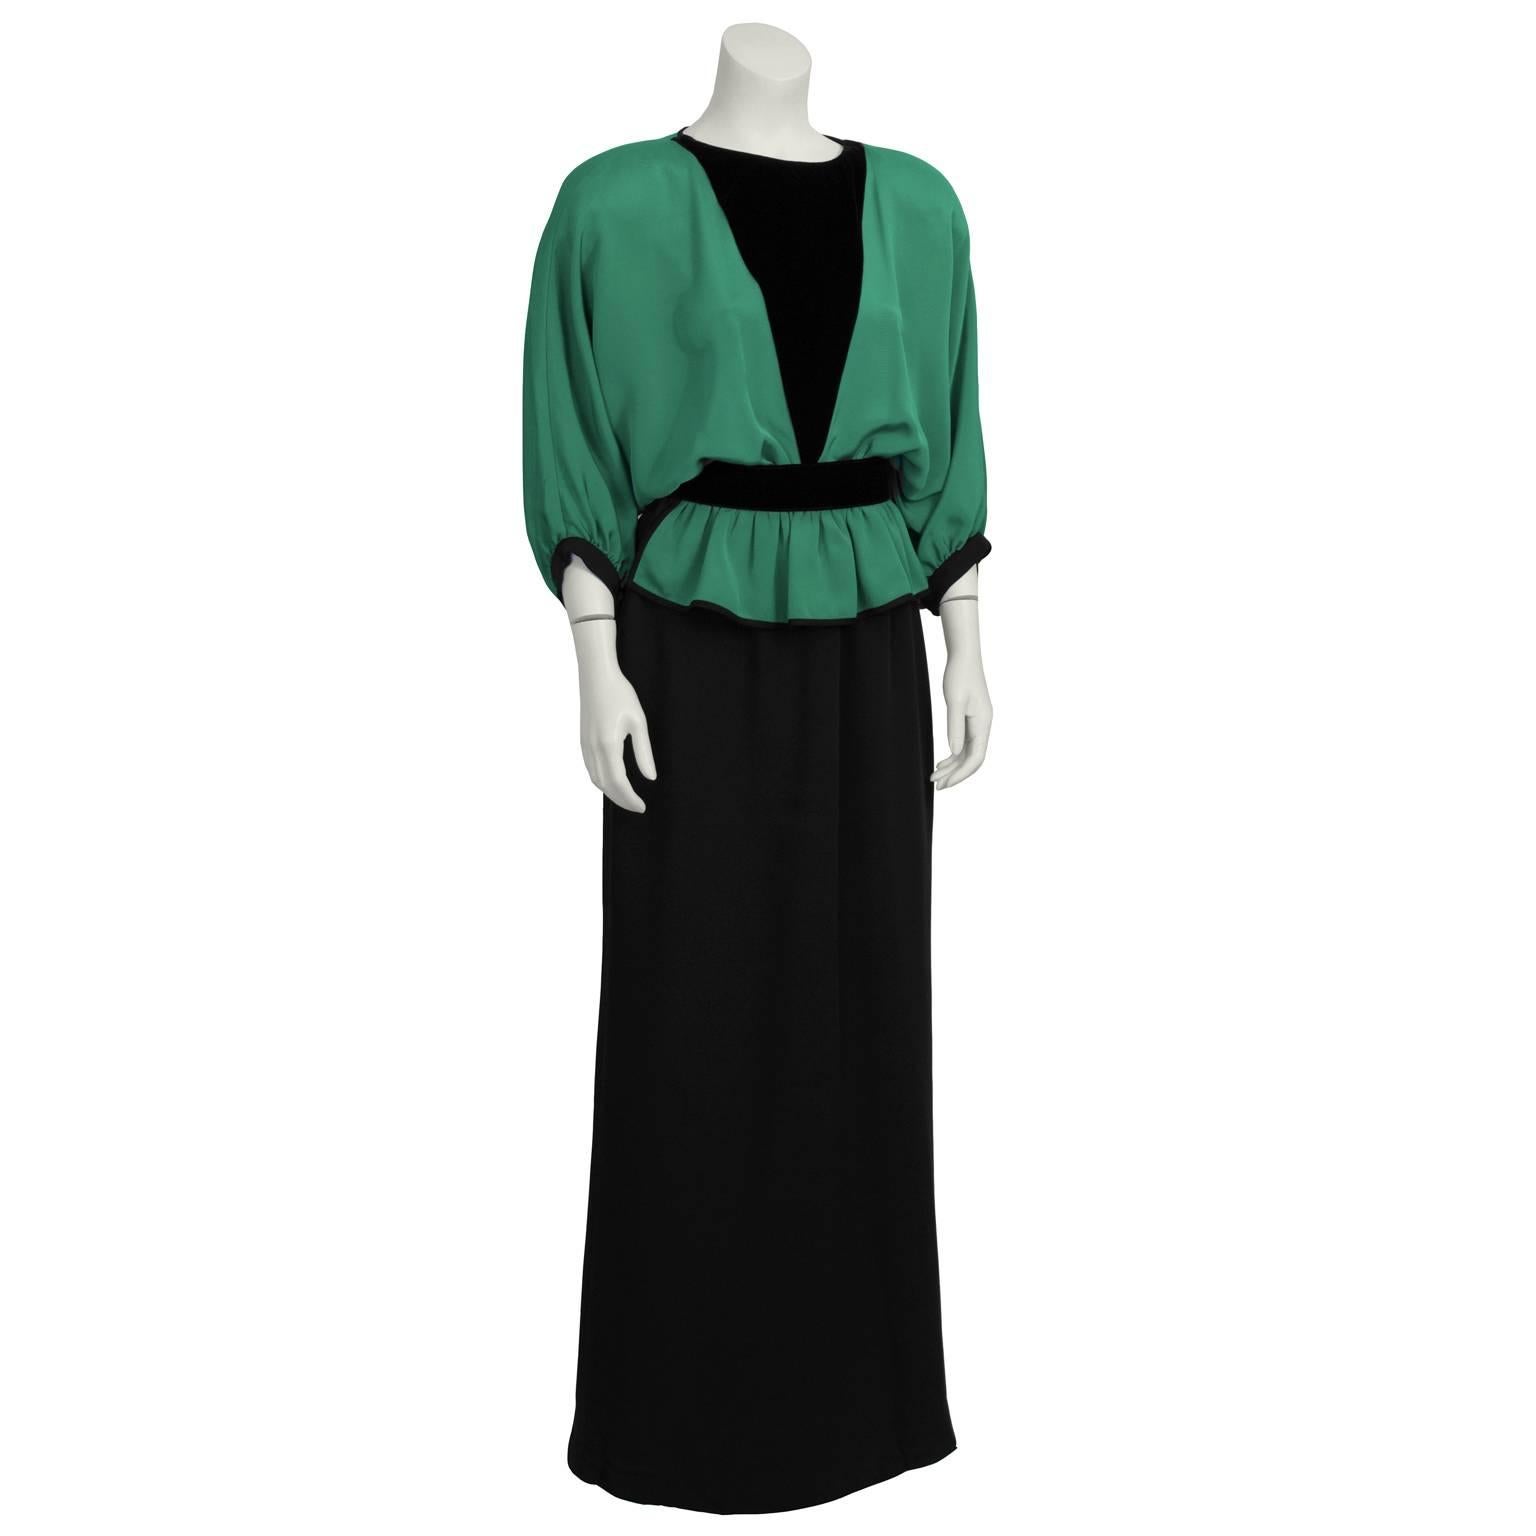 Fabulous green silk crepe and velvet black gown from Valentino from the 1990's features a  loose-fitting, green, bat wing sleeved bodice with a deep black velvet V in the center. Waist is cinched with gathering. Straight cut black skirt. Back single